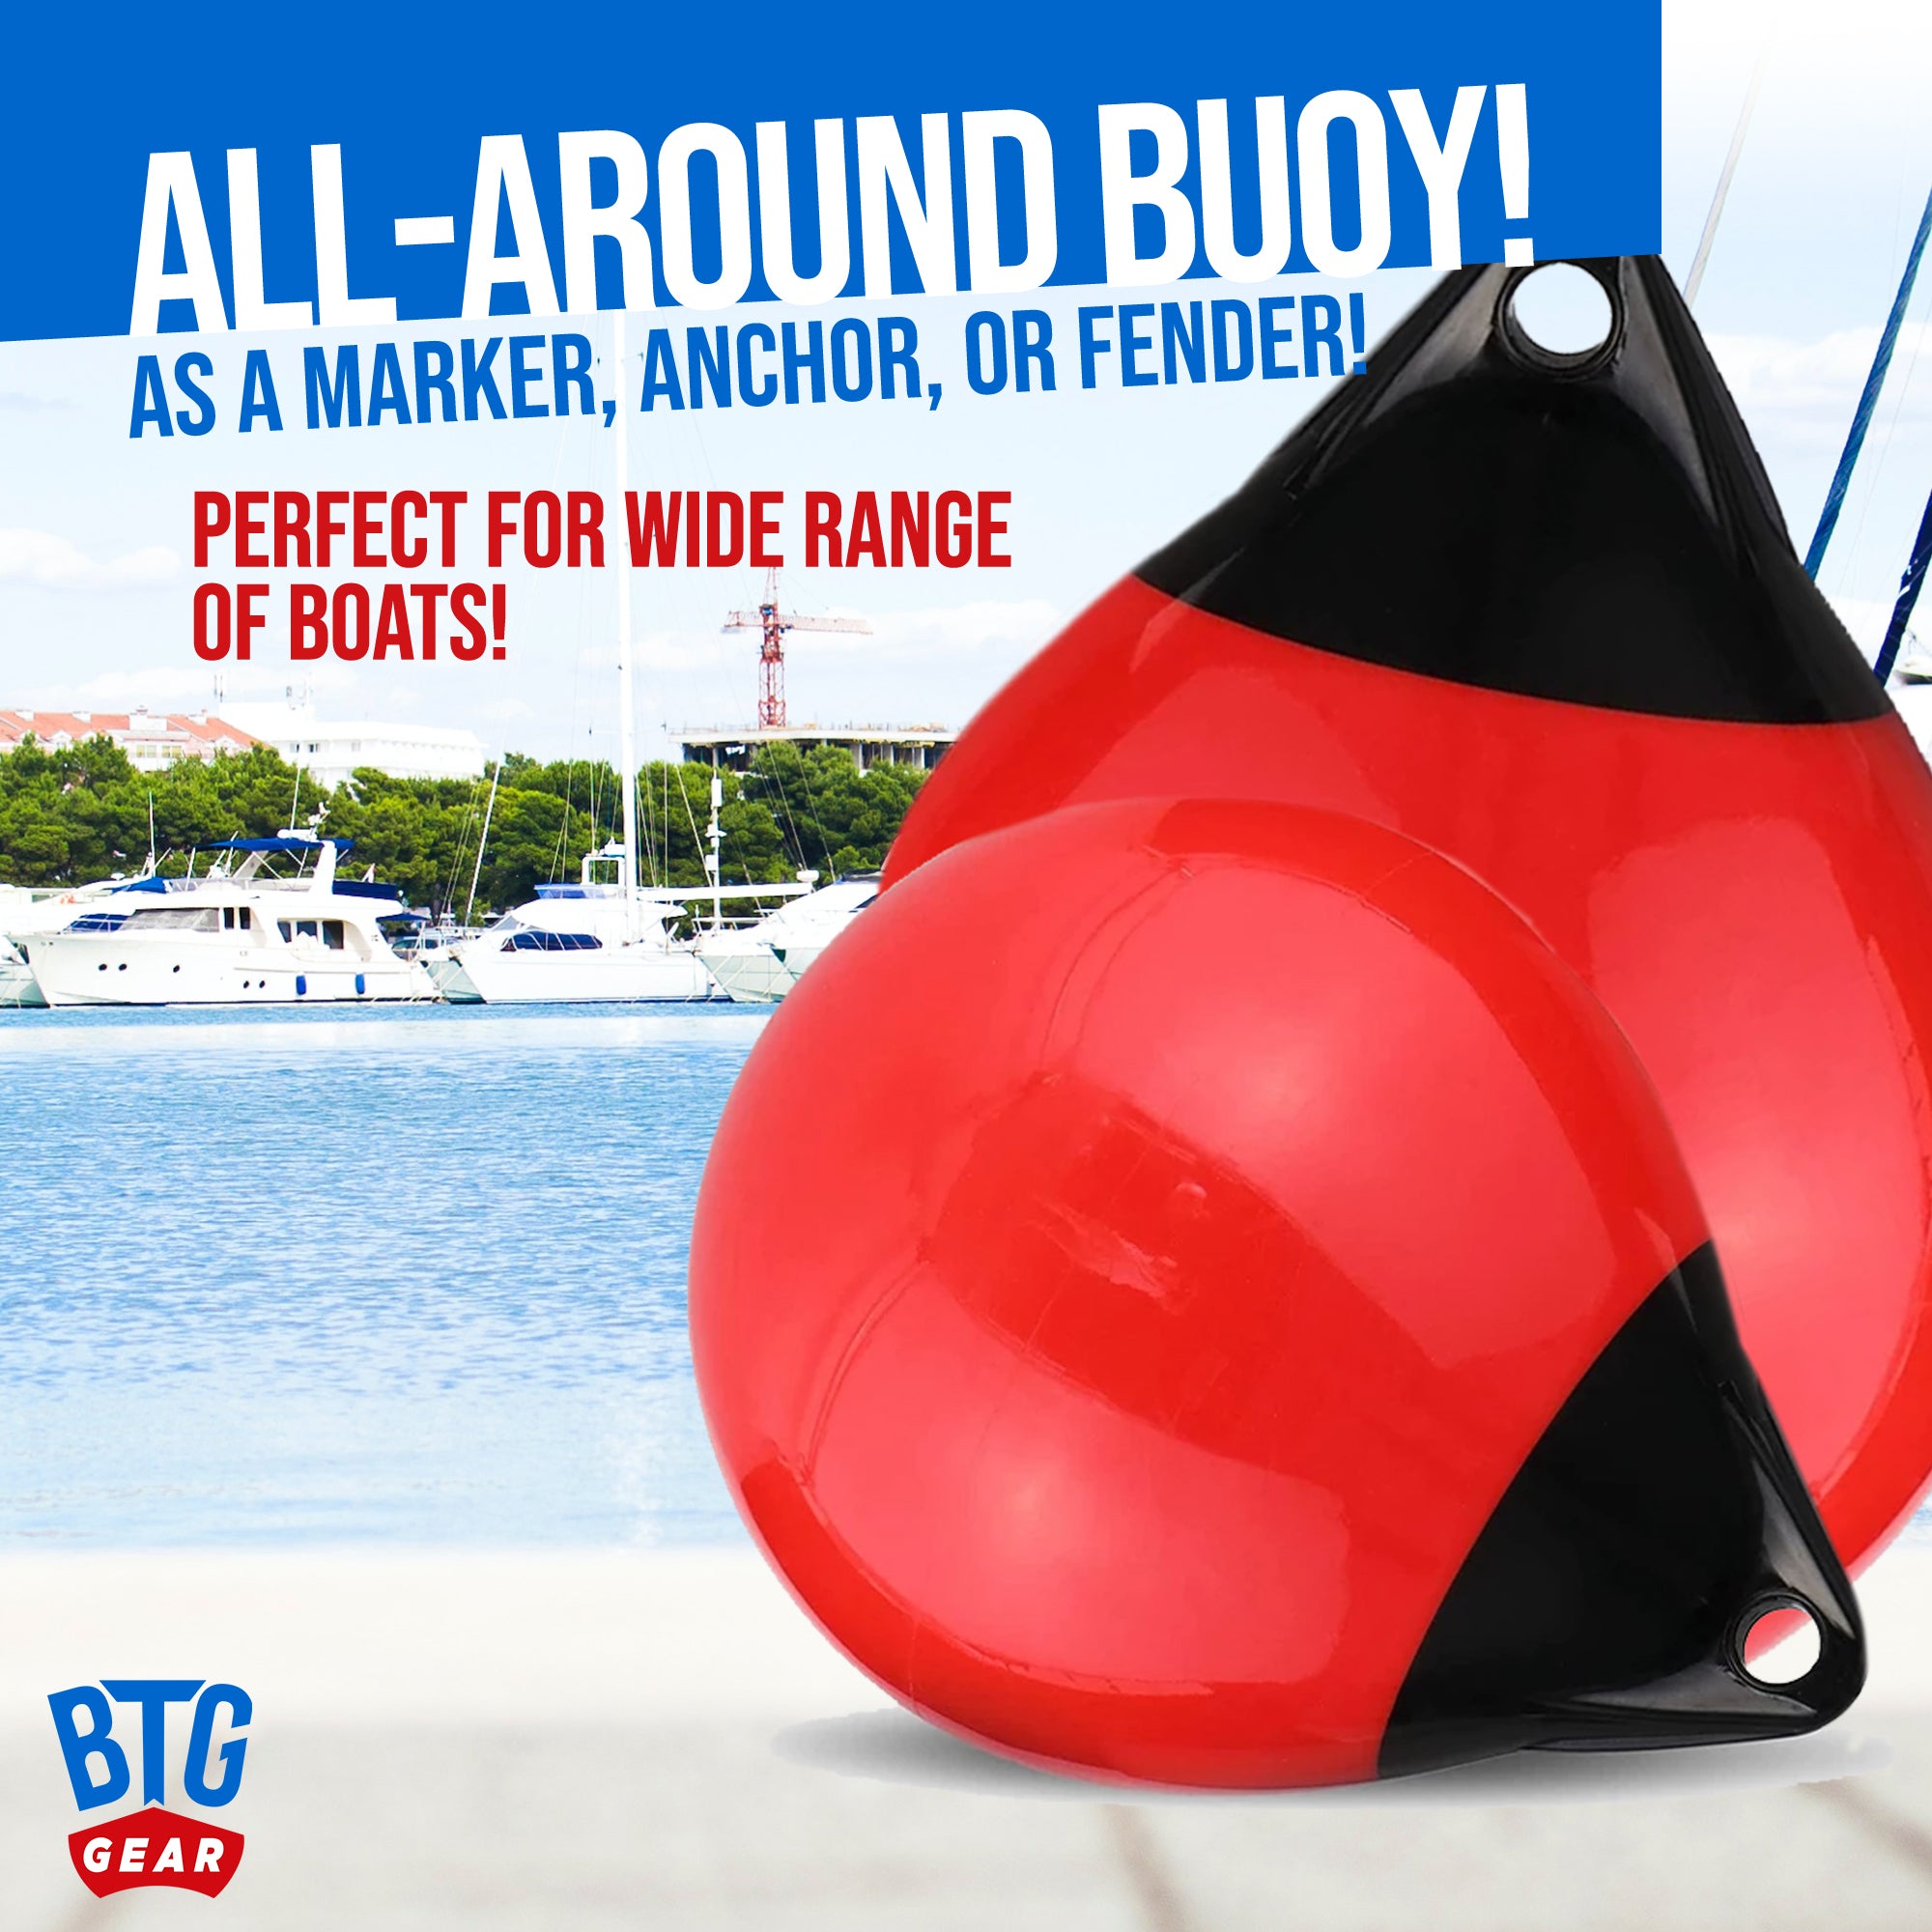 BTG Gear 15 x 20 Red Boat Mooring Buoys (Set of Two) Round Inflatable Balls for Docking/Fishing/Crab/etc.